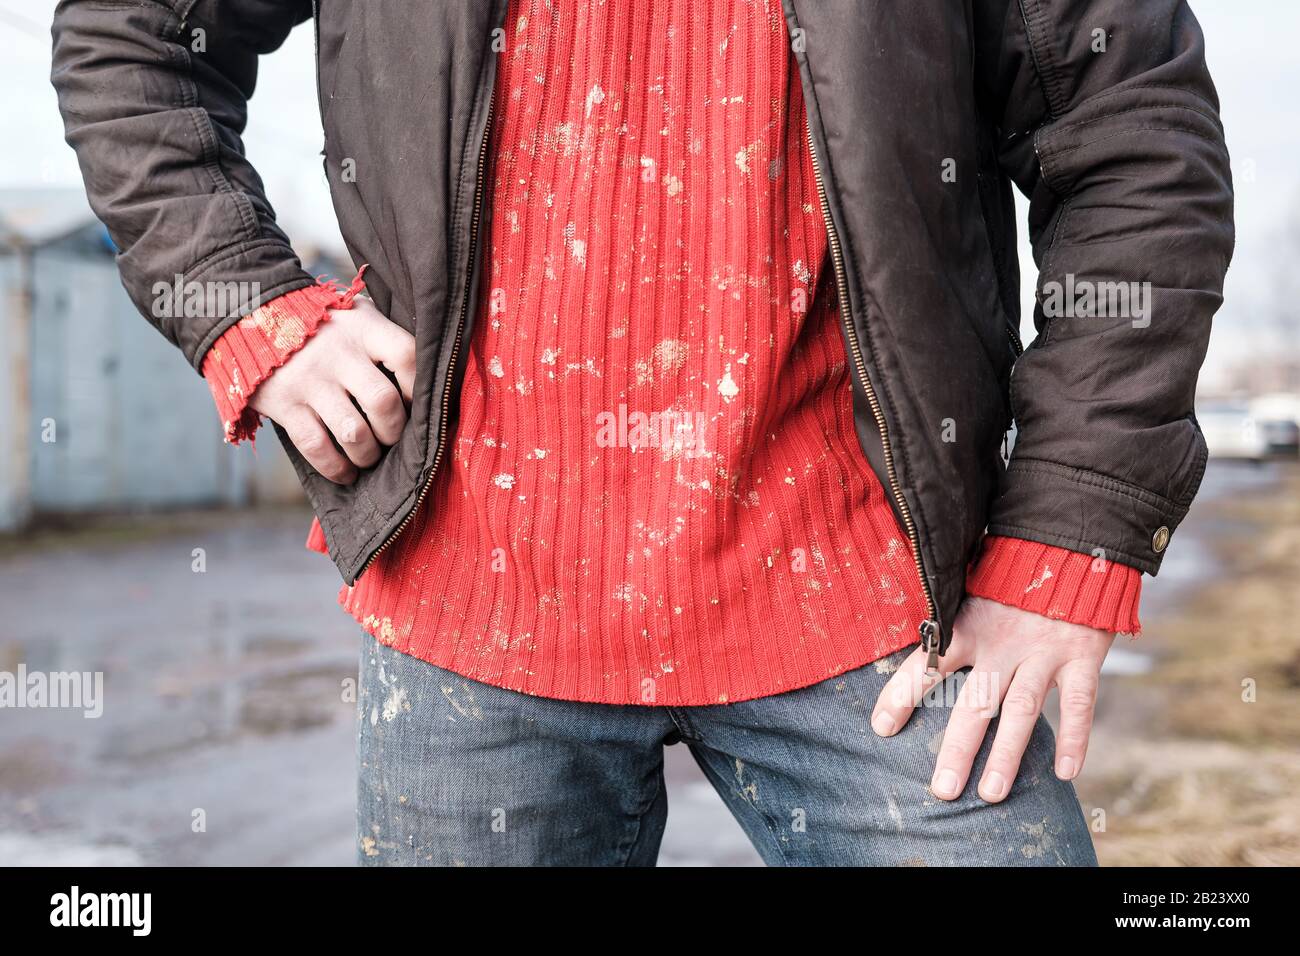 Man in dirty work clothes, a red knitted sweater and jeans. Stock Photo